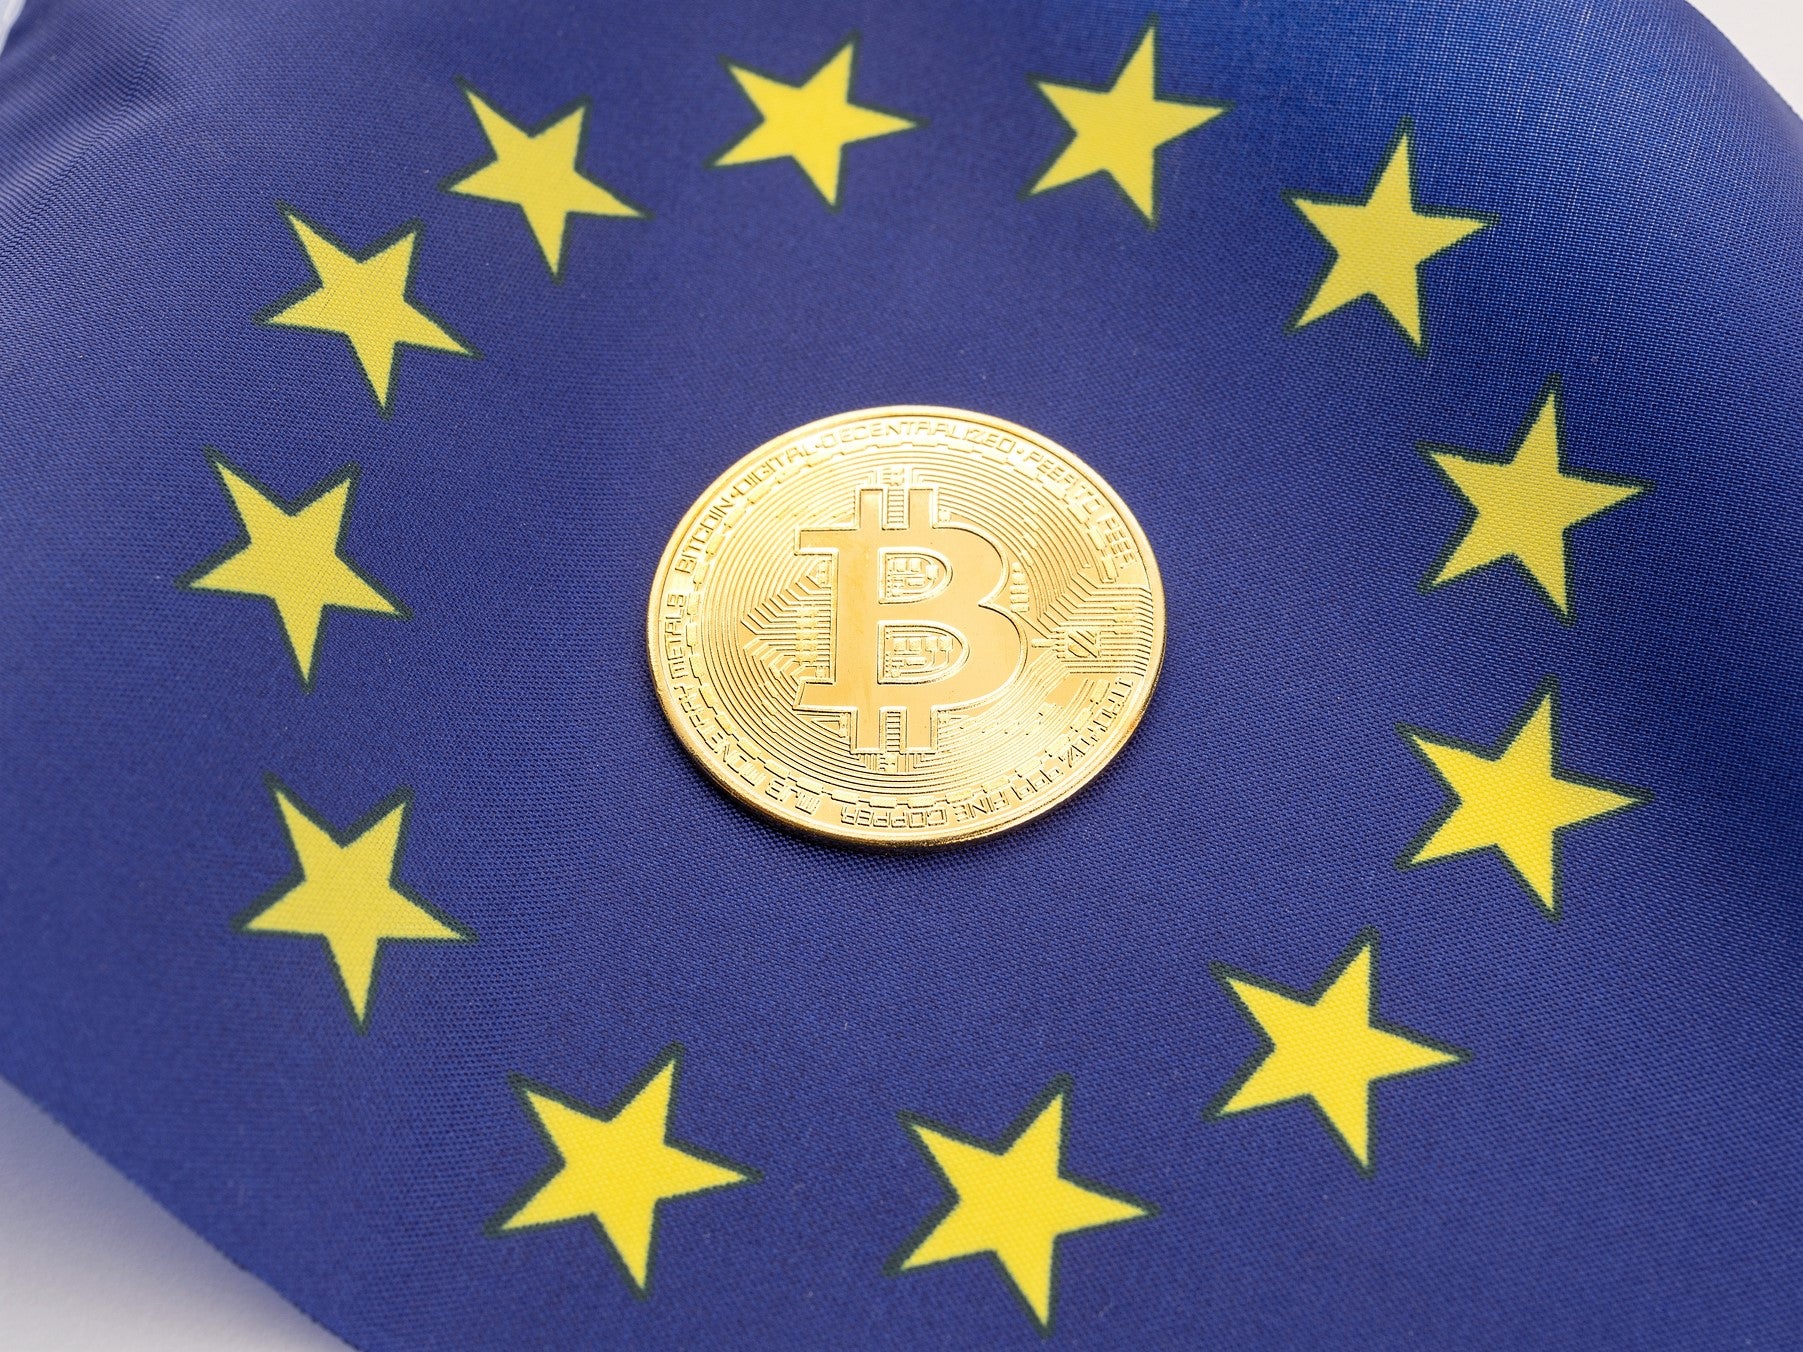 The European parliament is set to vote on bitcoin mining on 14 March, 2022